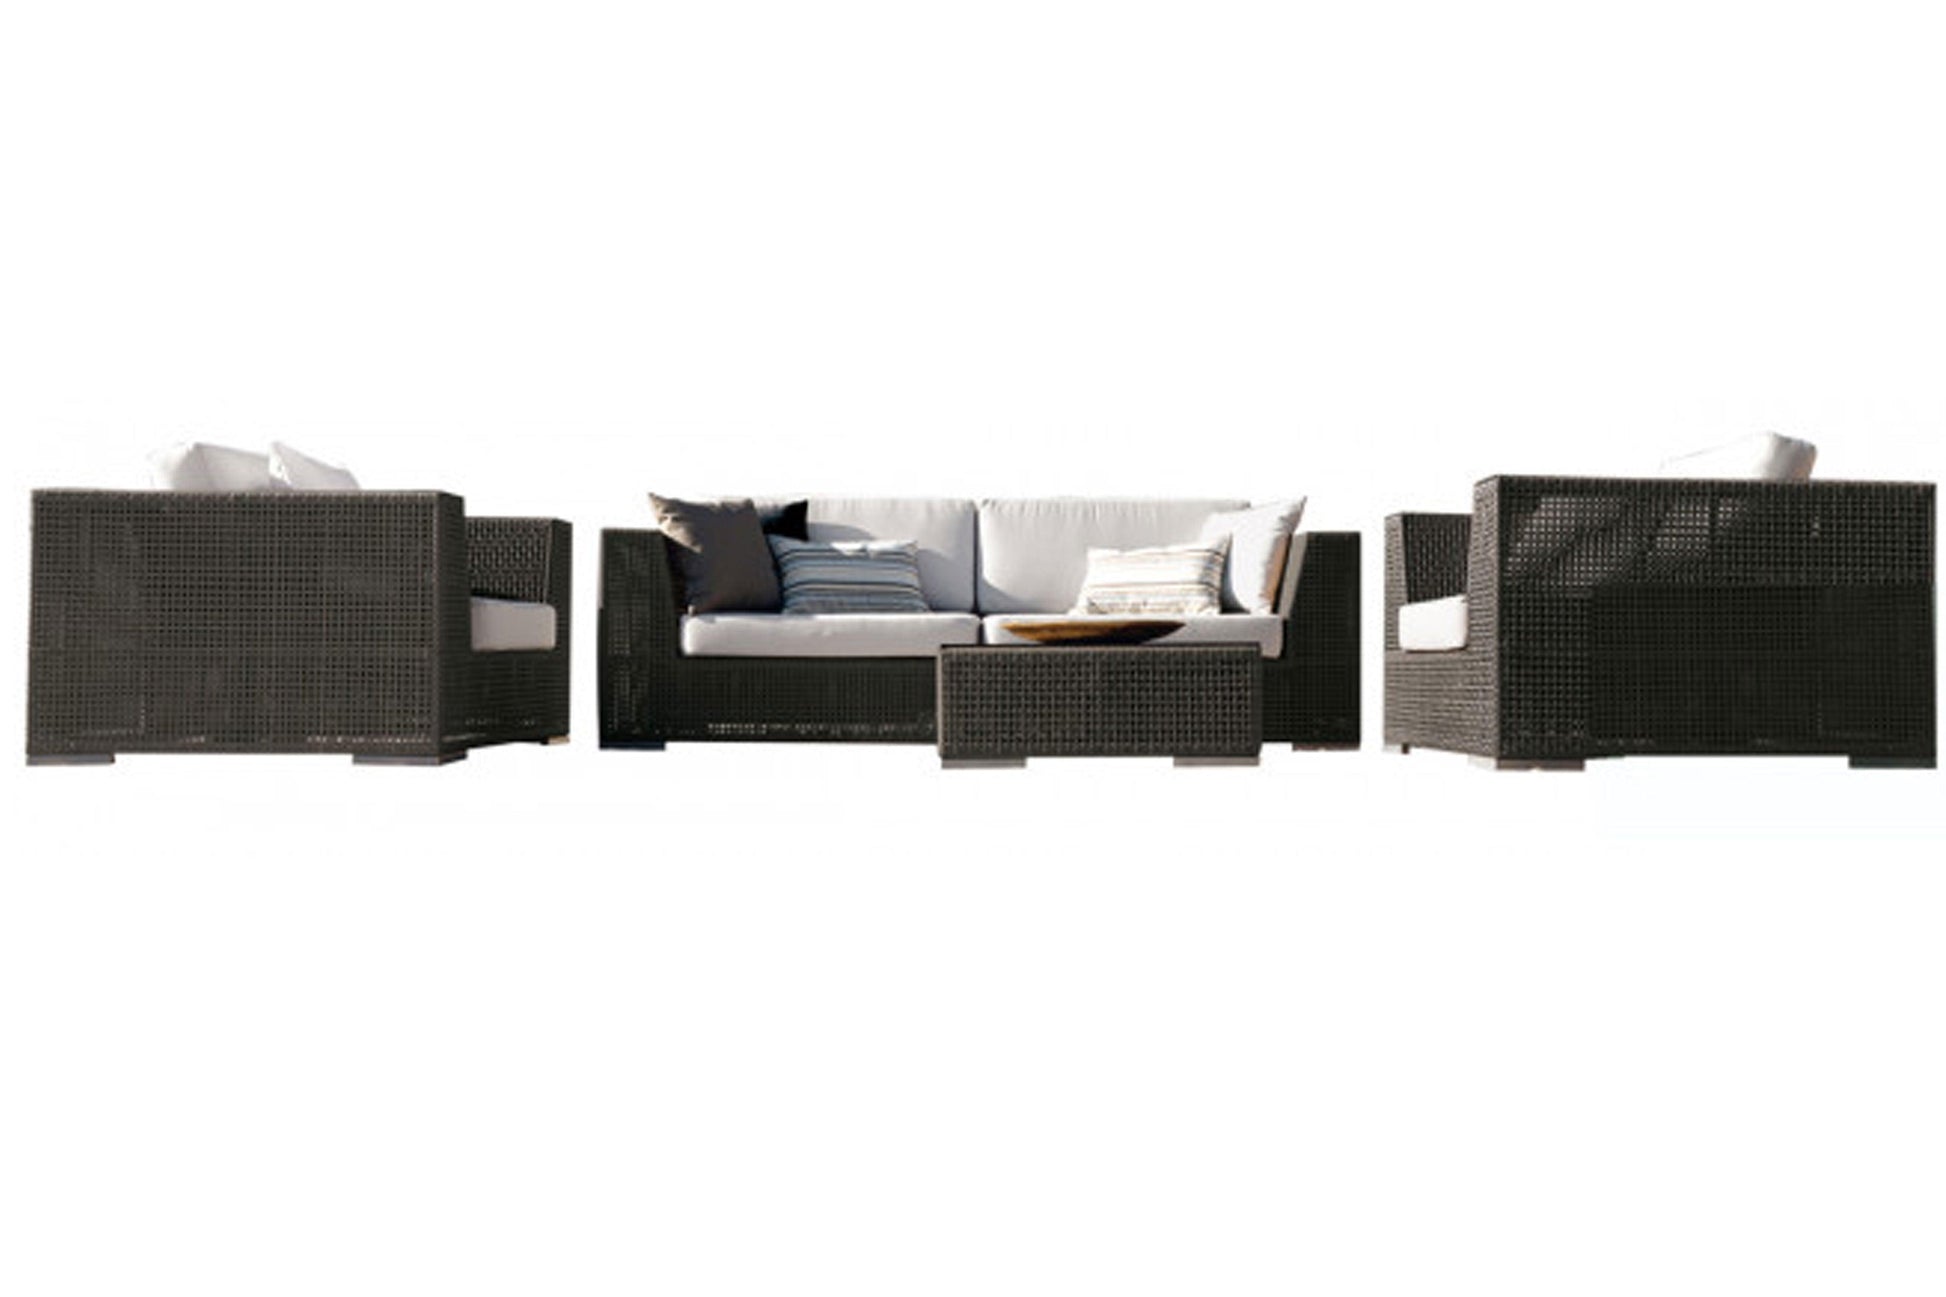 Atlantis 5 PC Sectional Deep Seating Group w/off-white cushions - Venini Furniture 